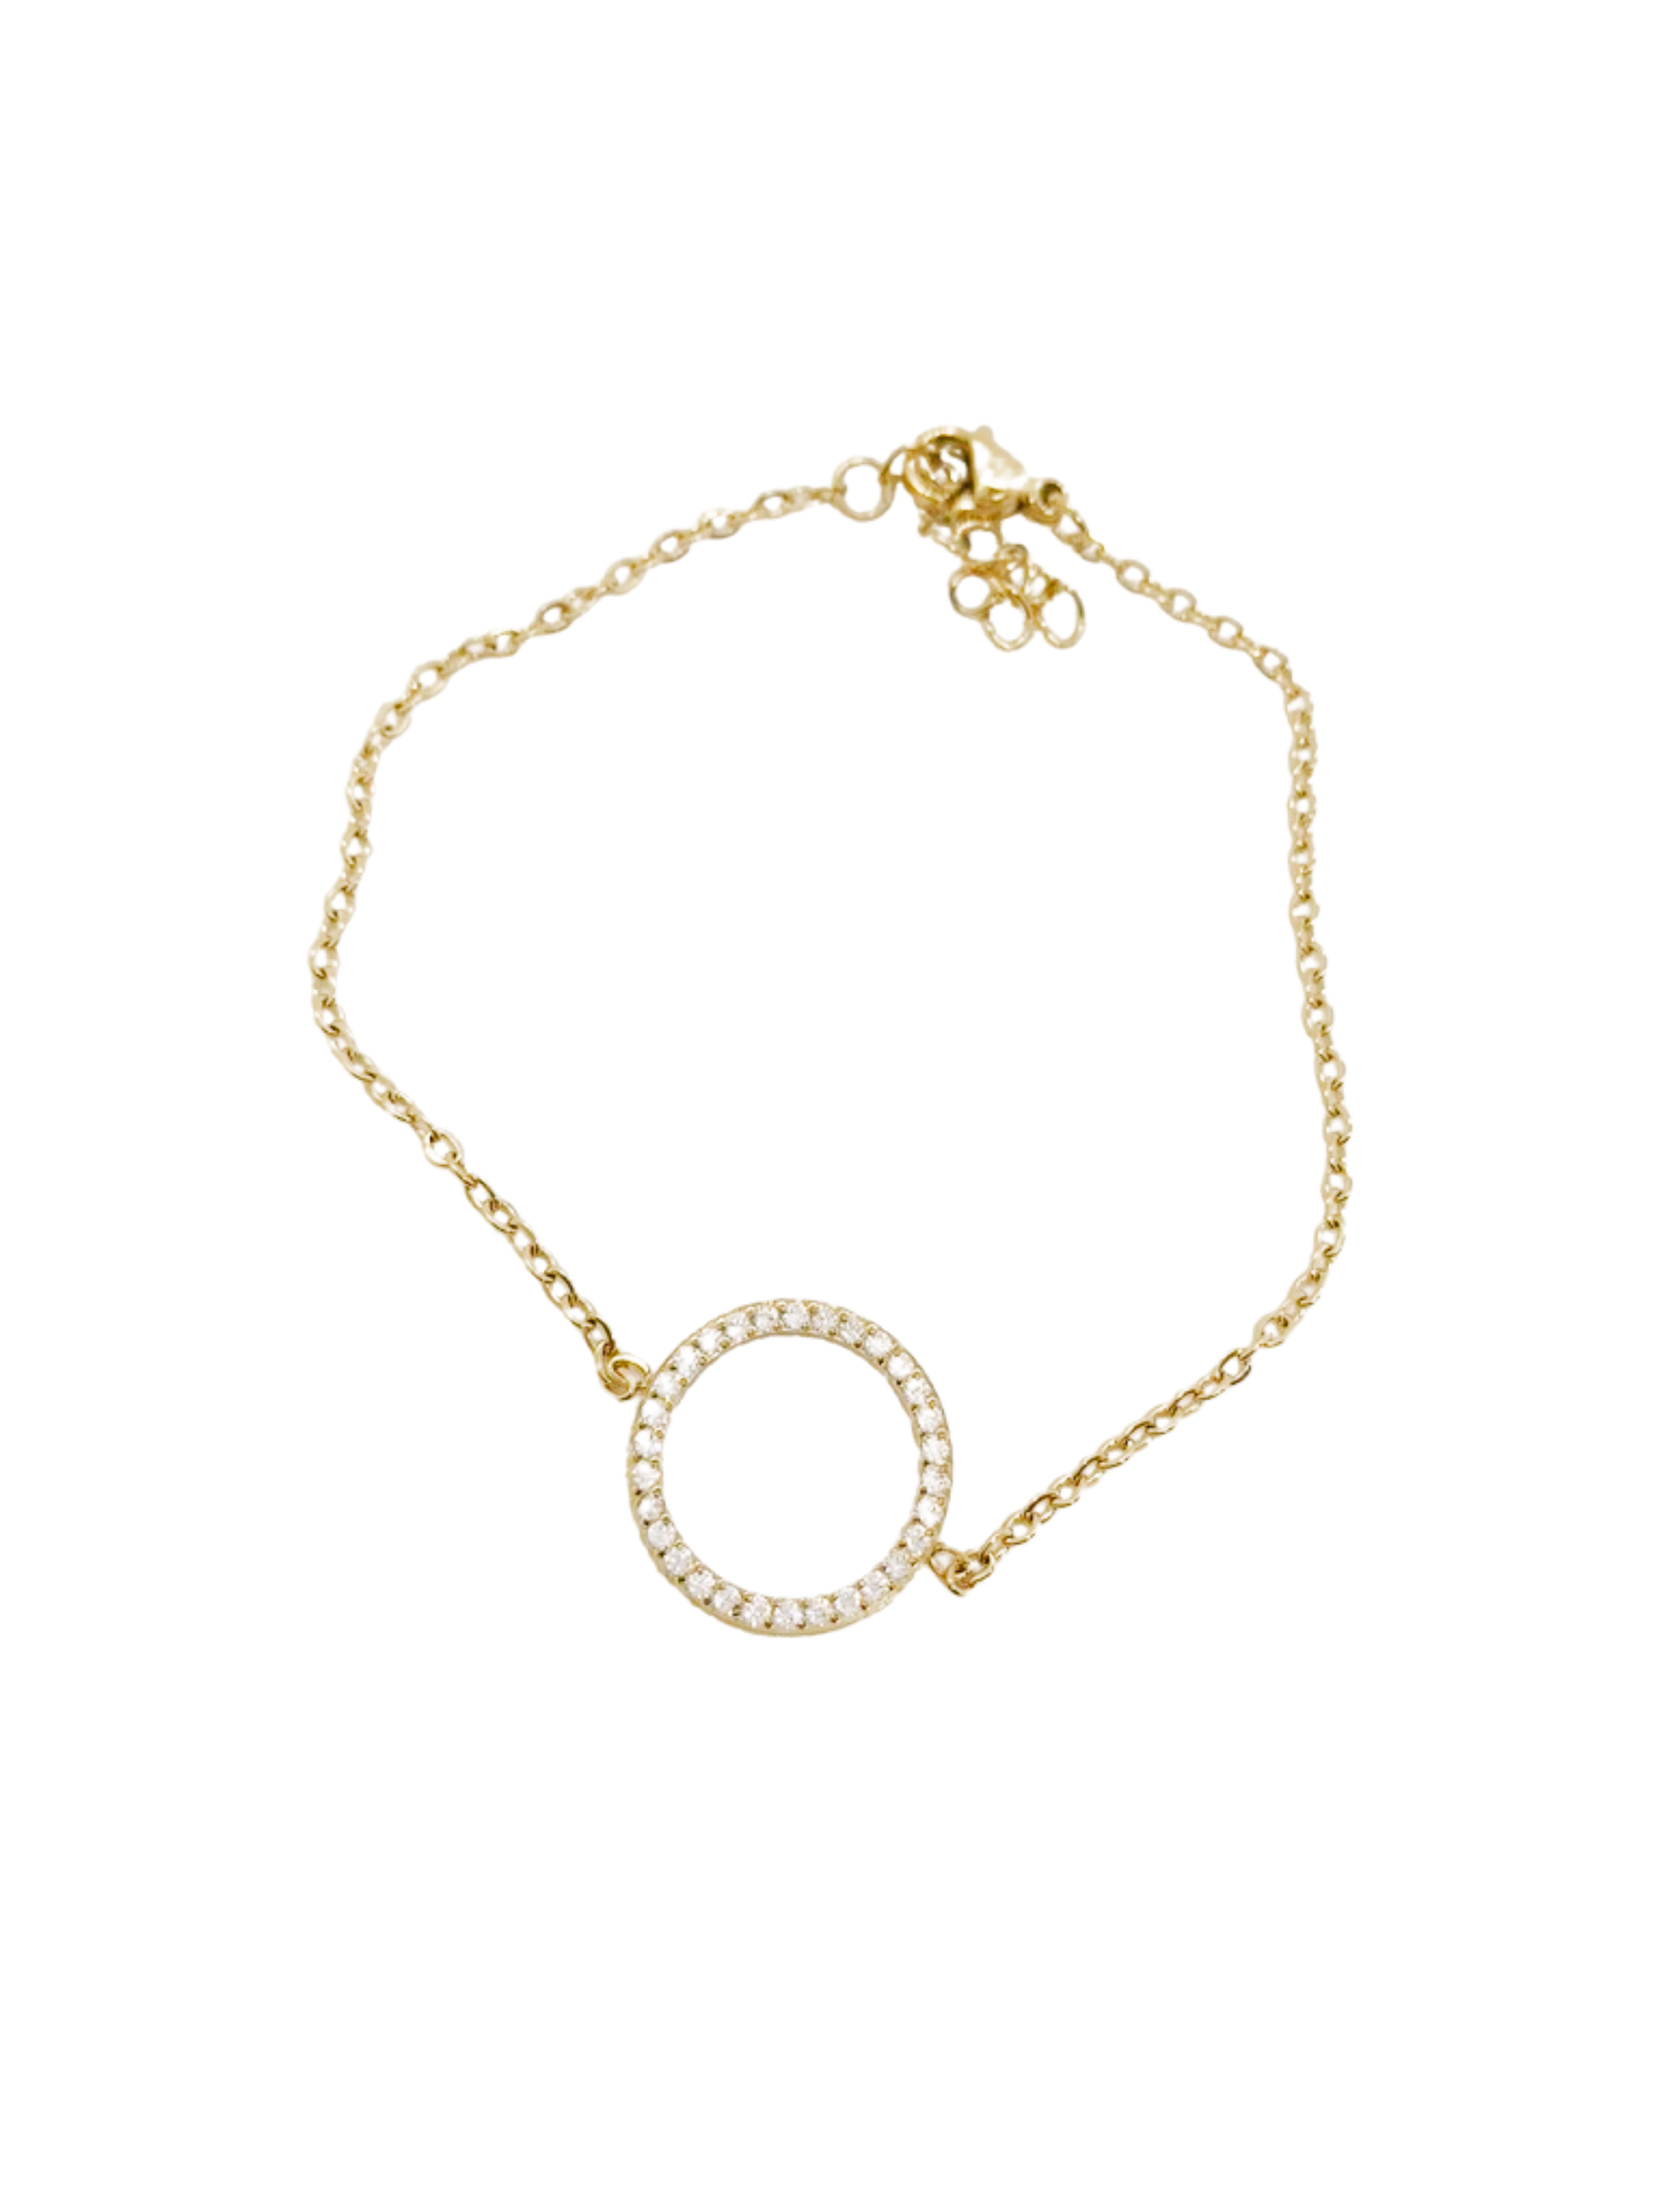 Stainless steel and 14K gold plated jewellery, that is affordable and will last you a lifetime. Dainty designs, for you to wear it everyday, without loosing its colour..